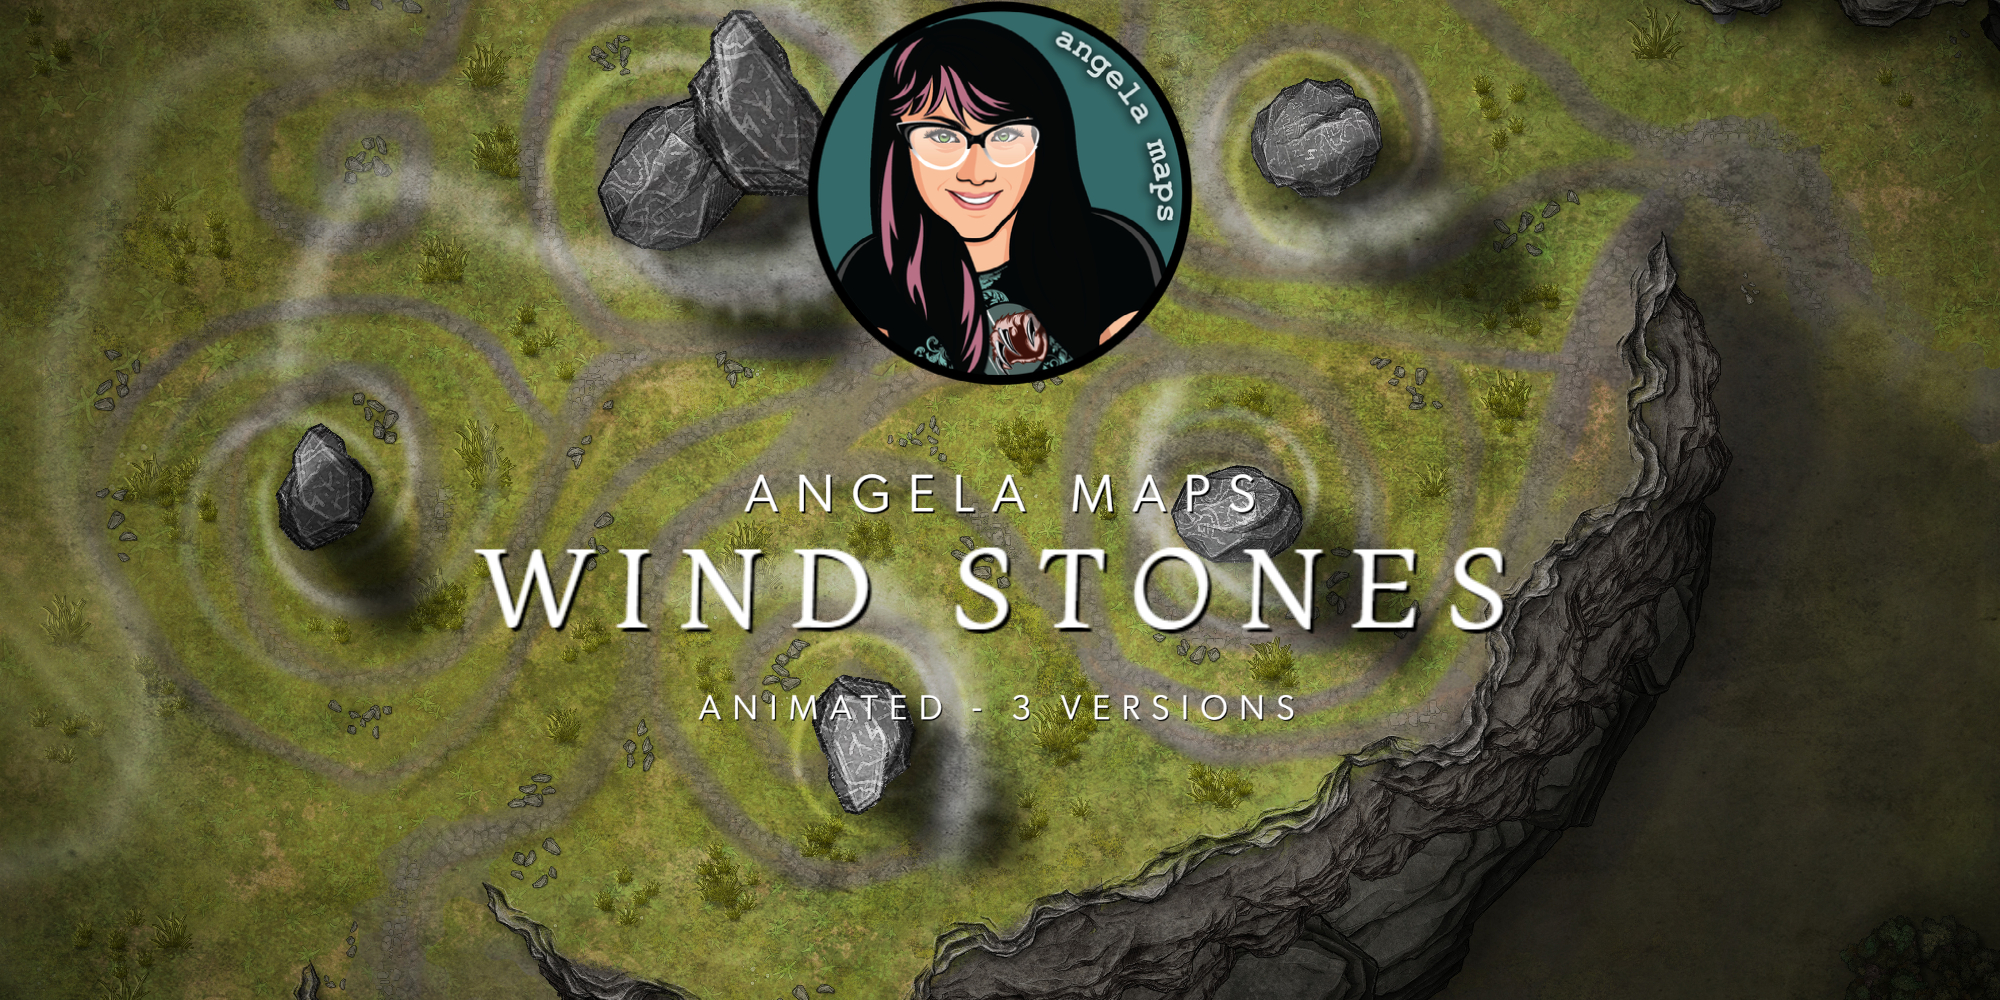 Wind stones magical battle map with the wind element dancing around etched stones. Animated.